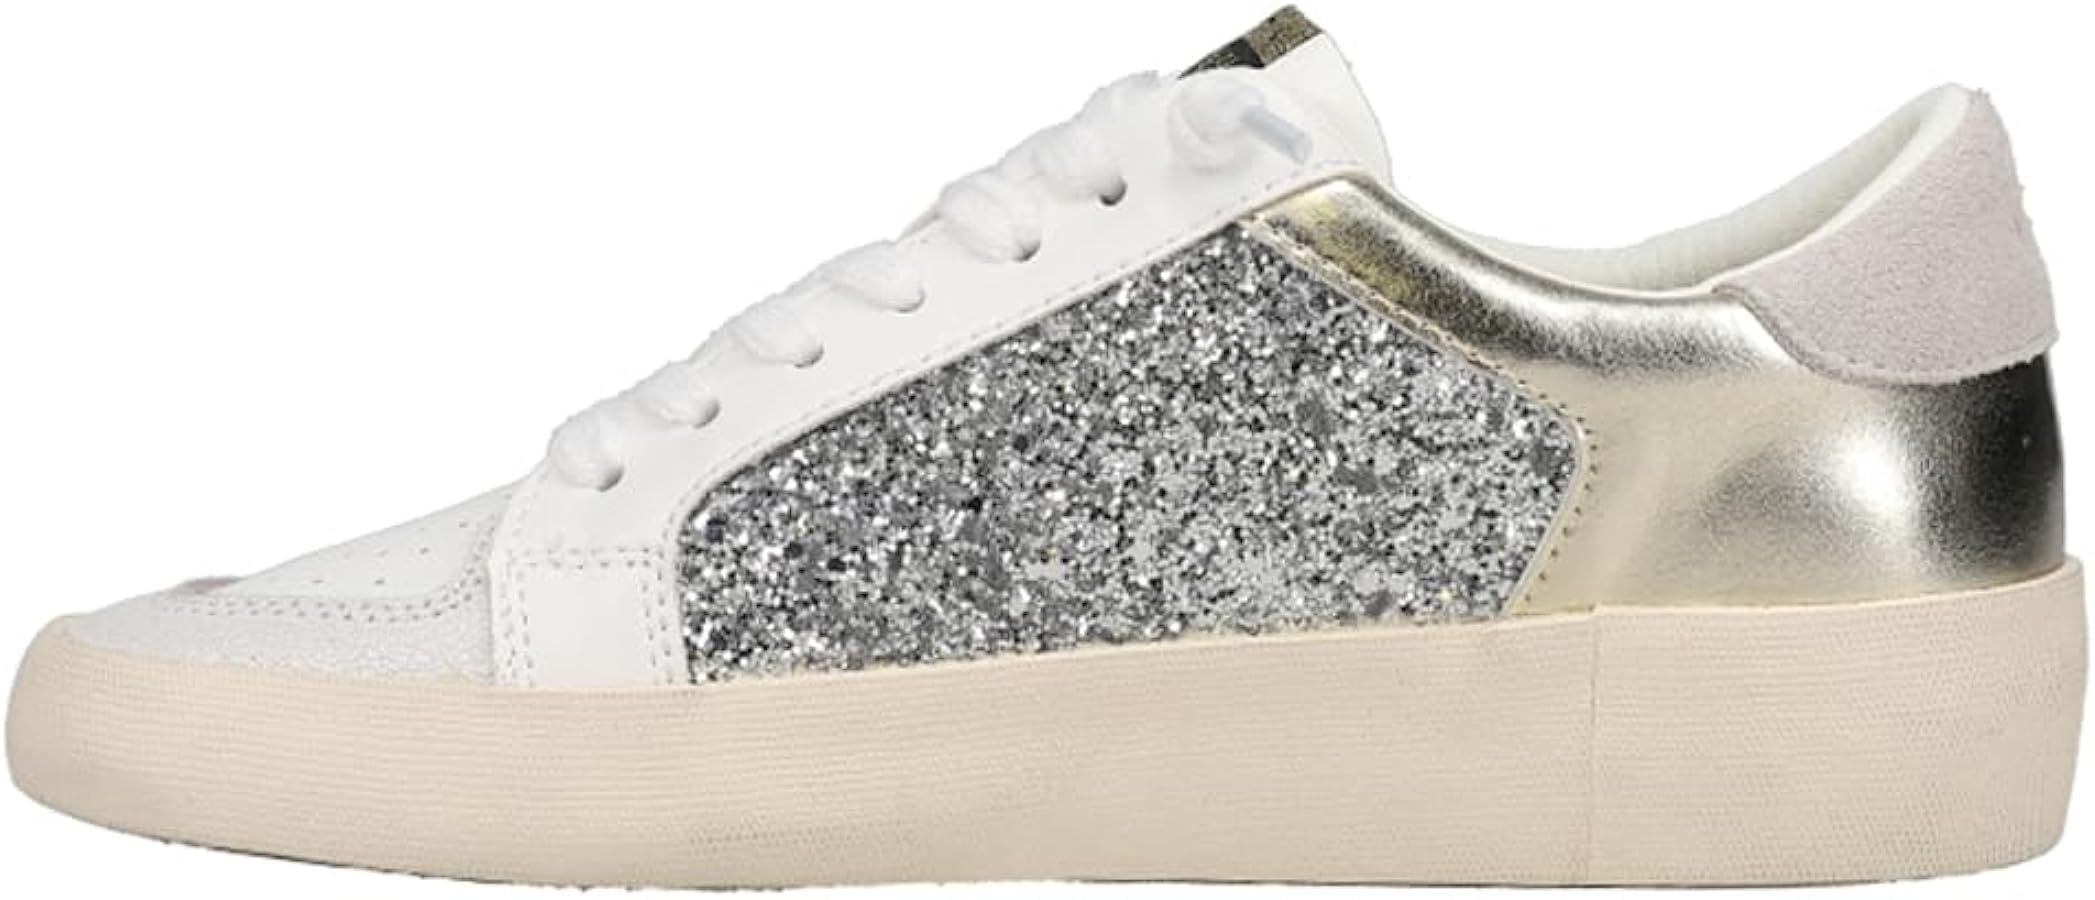 VINTAGE HAVANA Womens Libby 1 Metallic Sneakers Shoes Casual - Gold, Silver, White | Amazon (US)